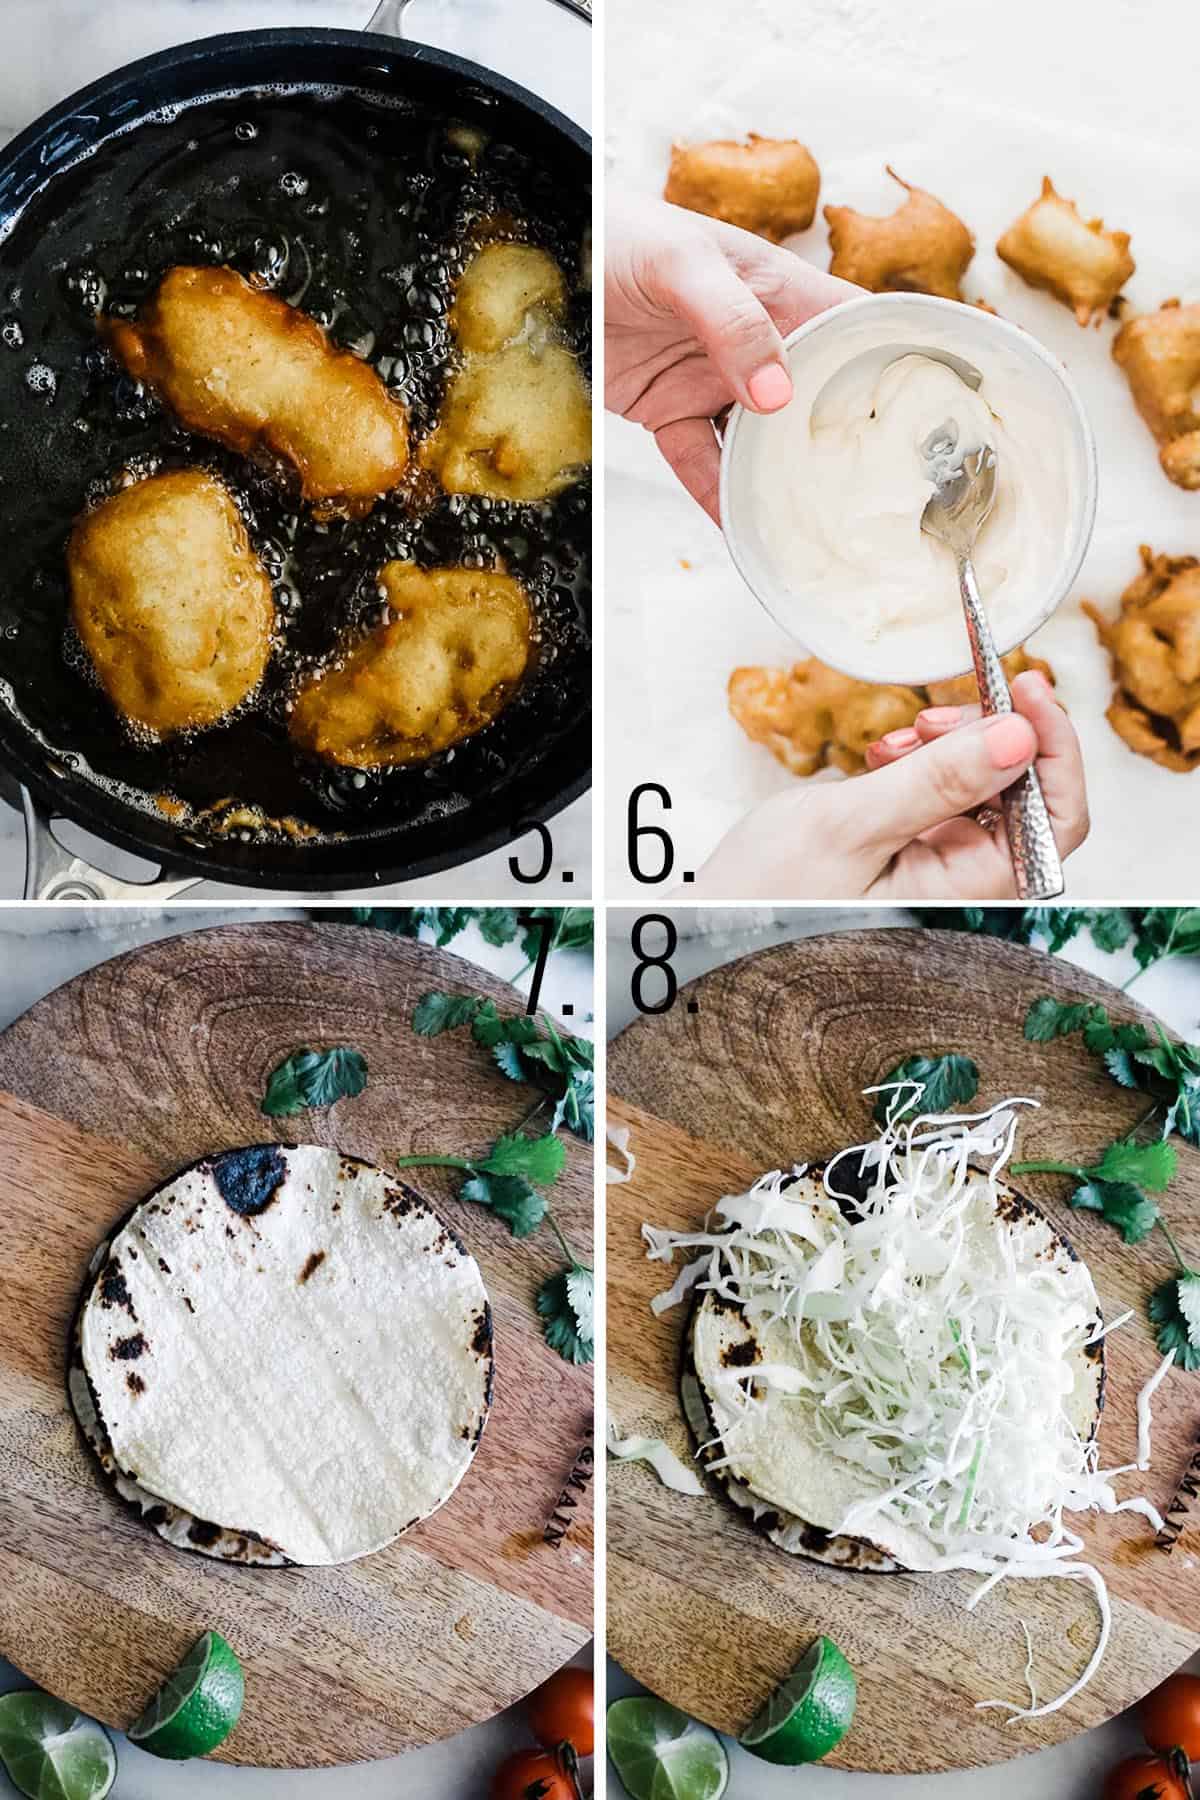 How to fry fish.